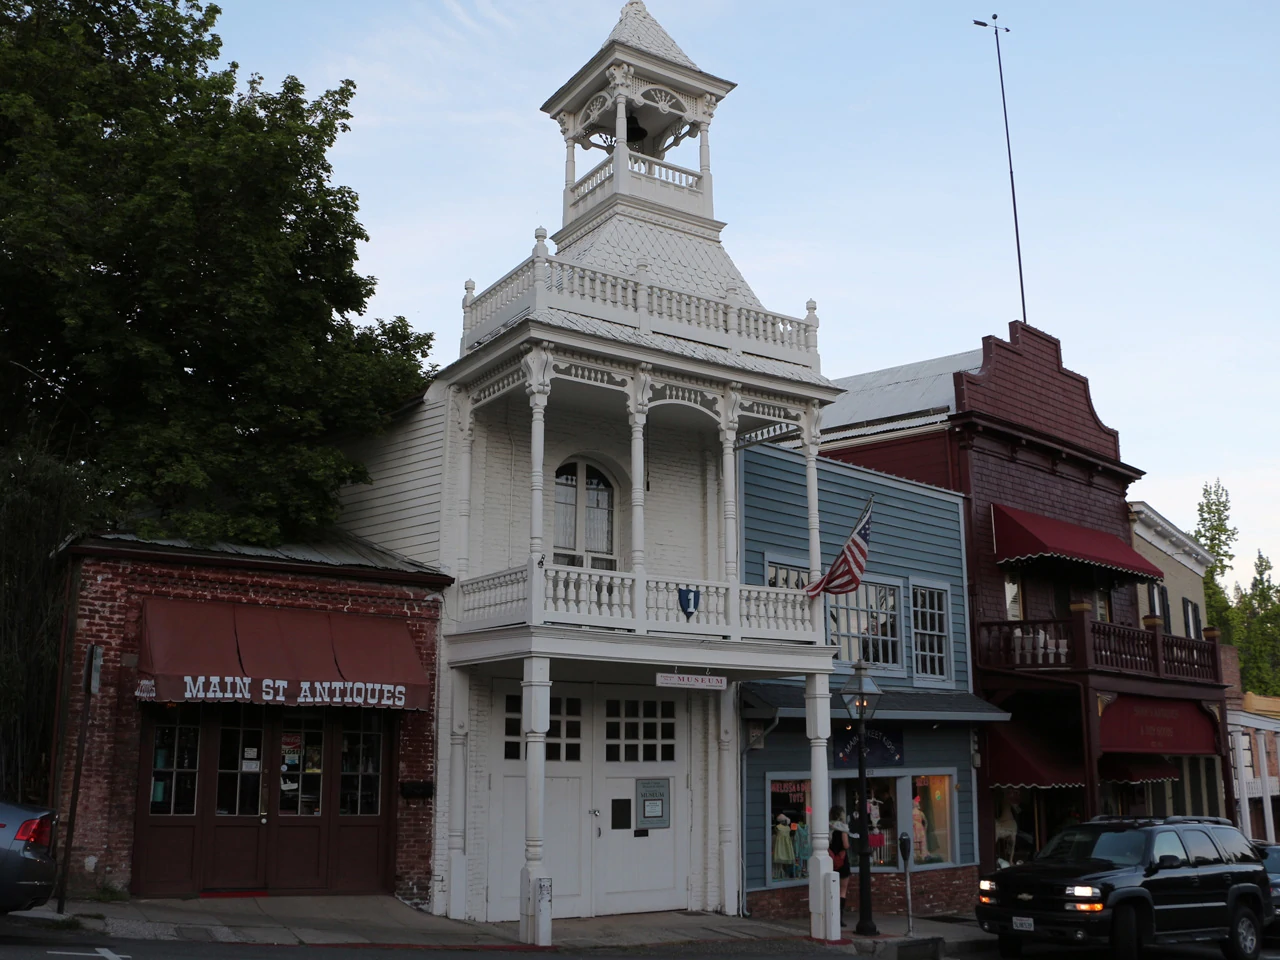 Fire station on broad street in Nevada City, California.